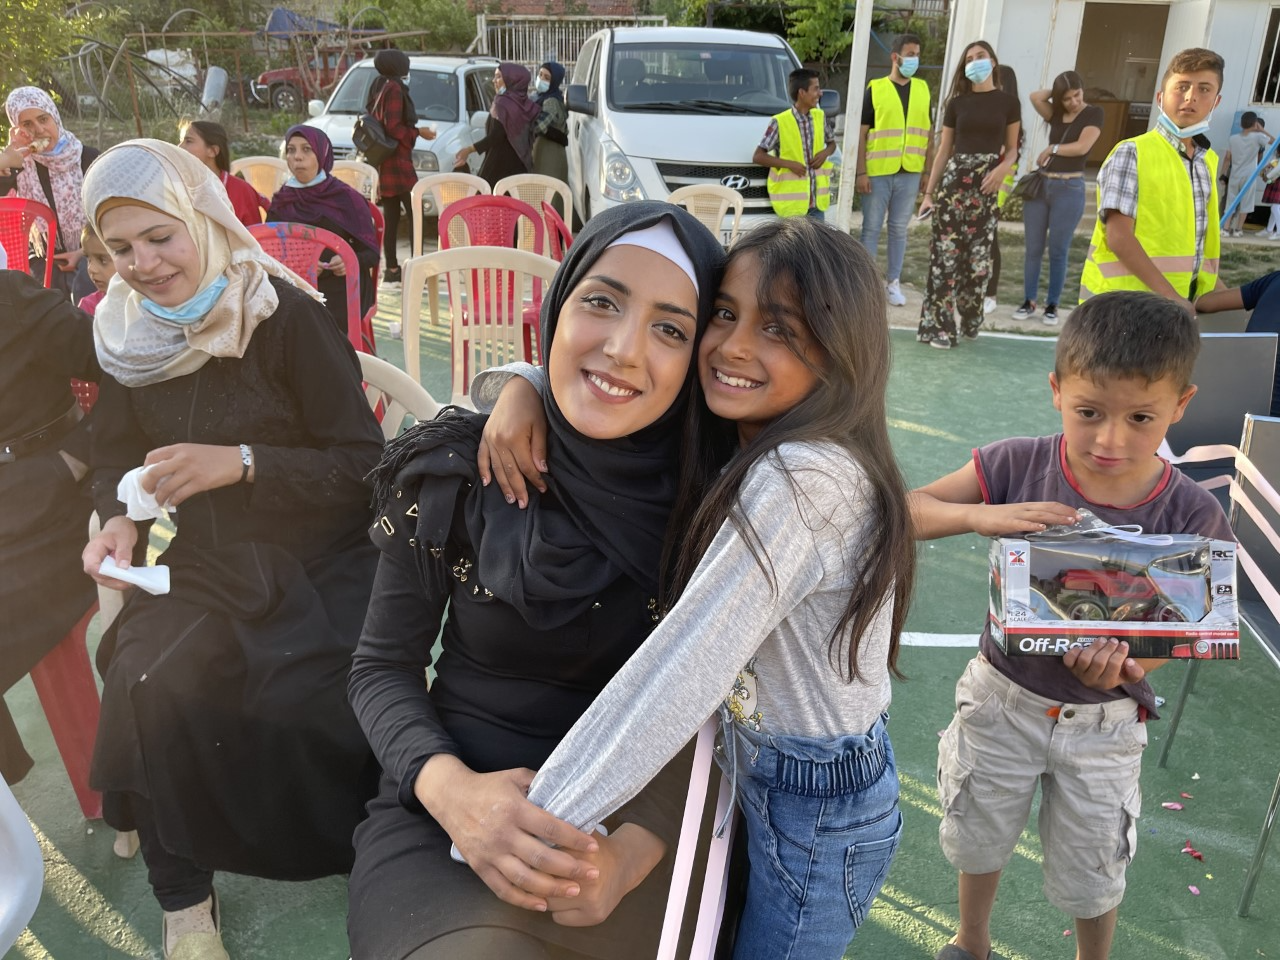  At the graduation, a refugee mother and daughter beam happiness and Hope, even for this brief moment  